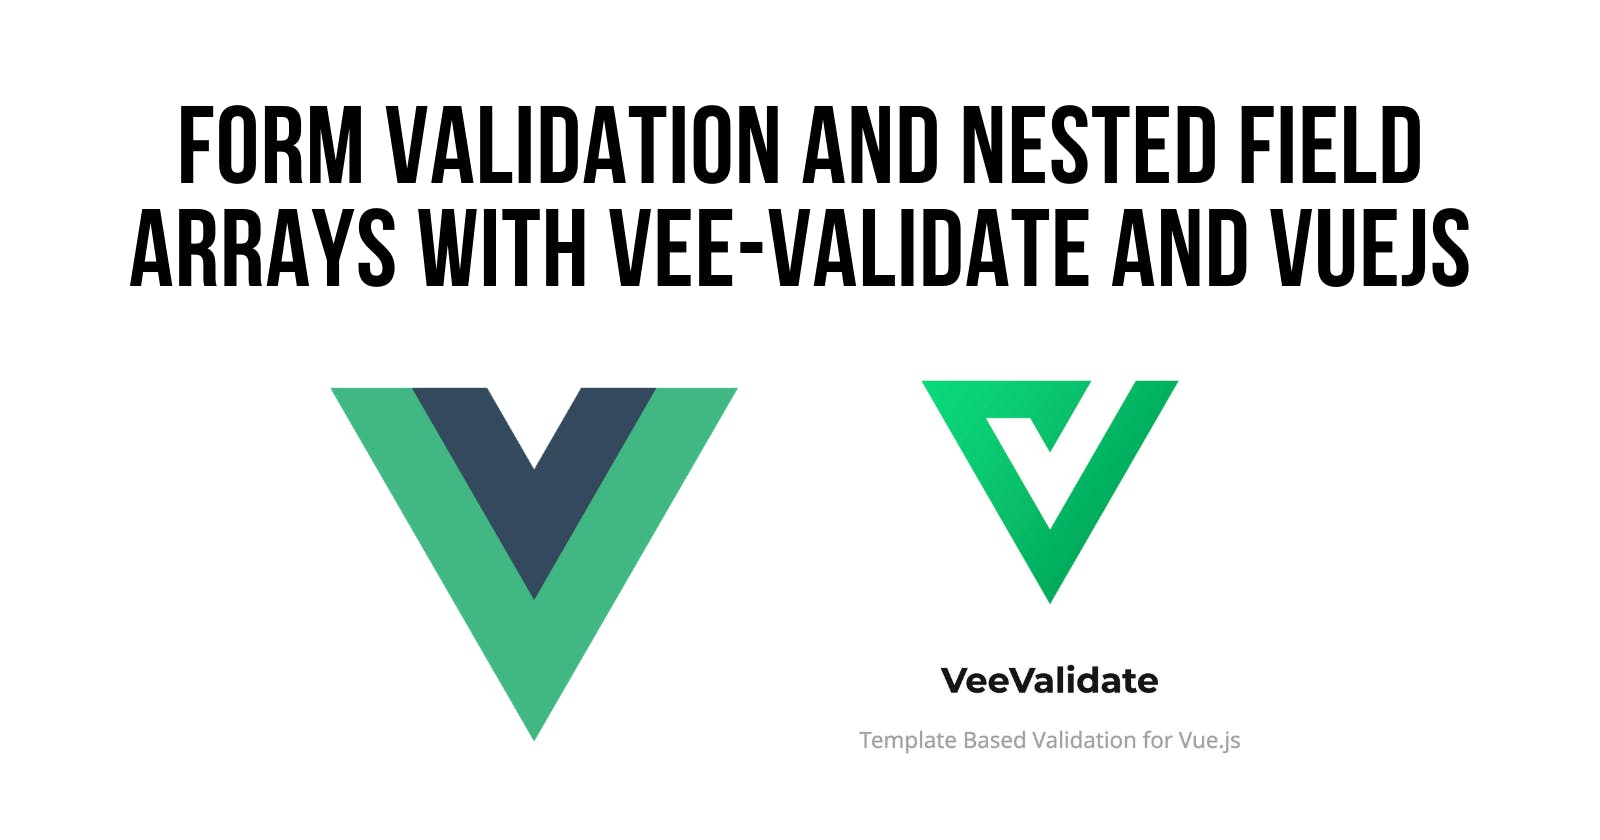 VueJS Form Validation and Nested Field Arrays/Dynamic Form Fields with Vee-Validate